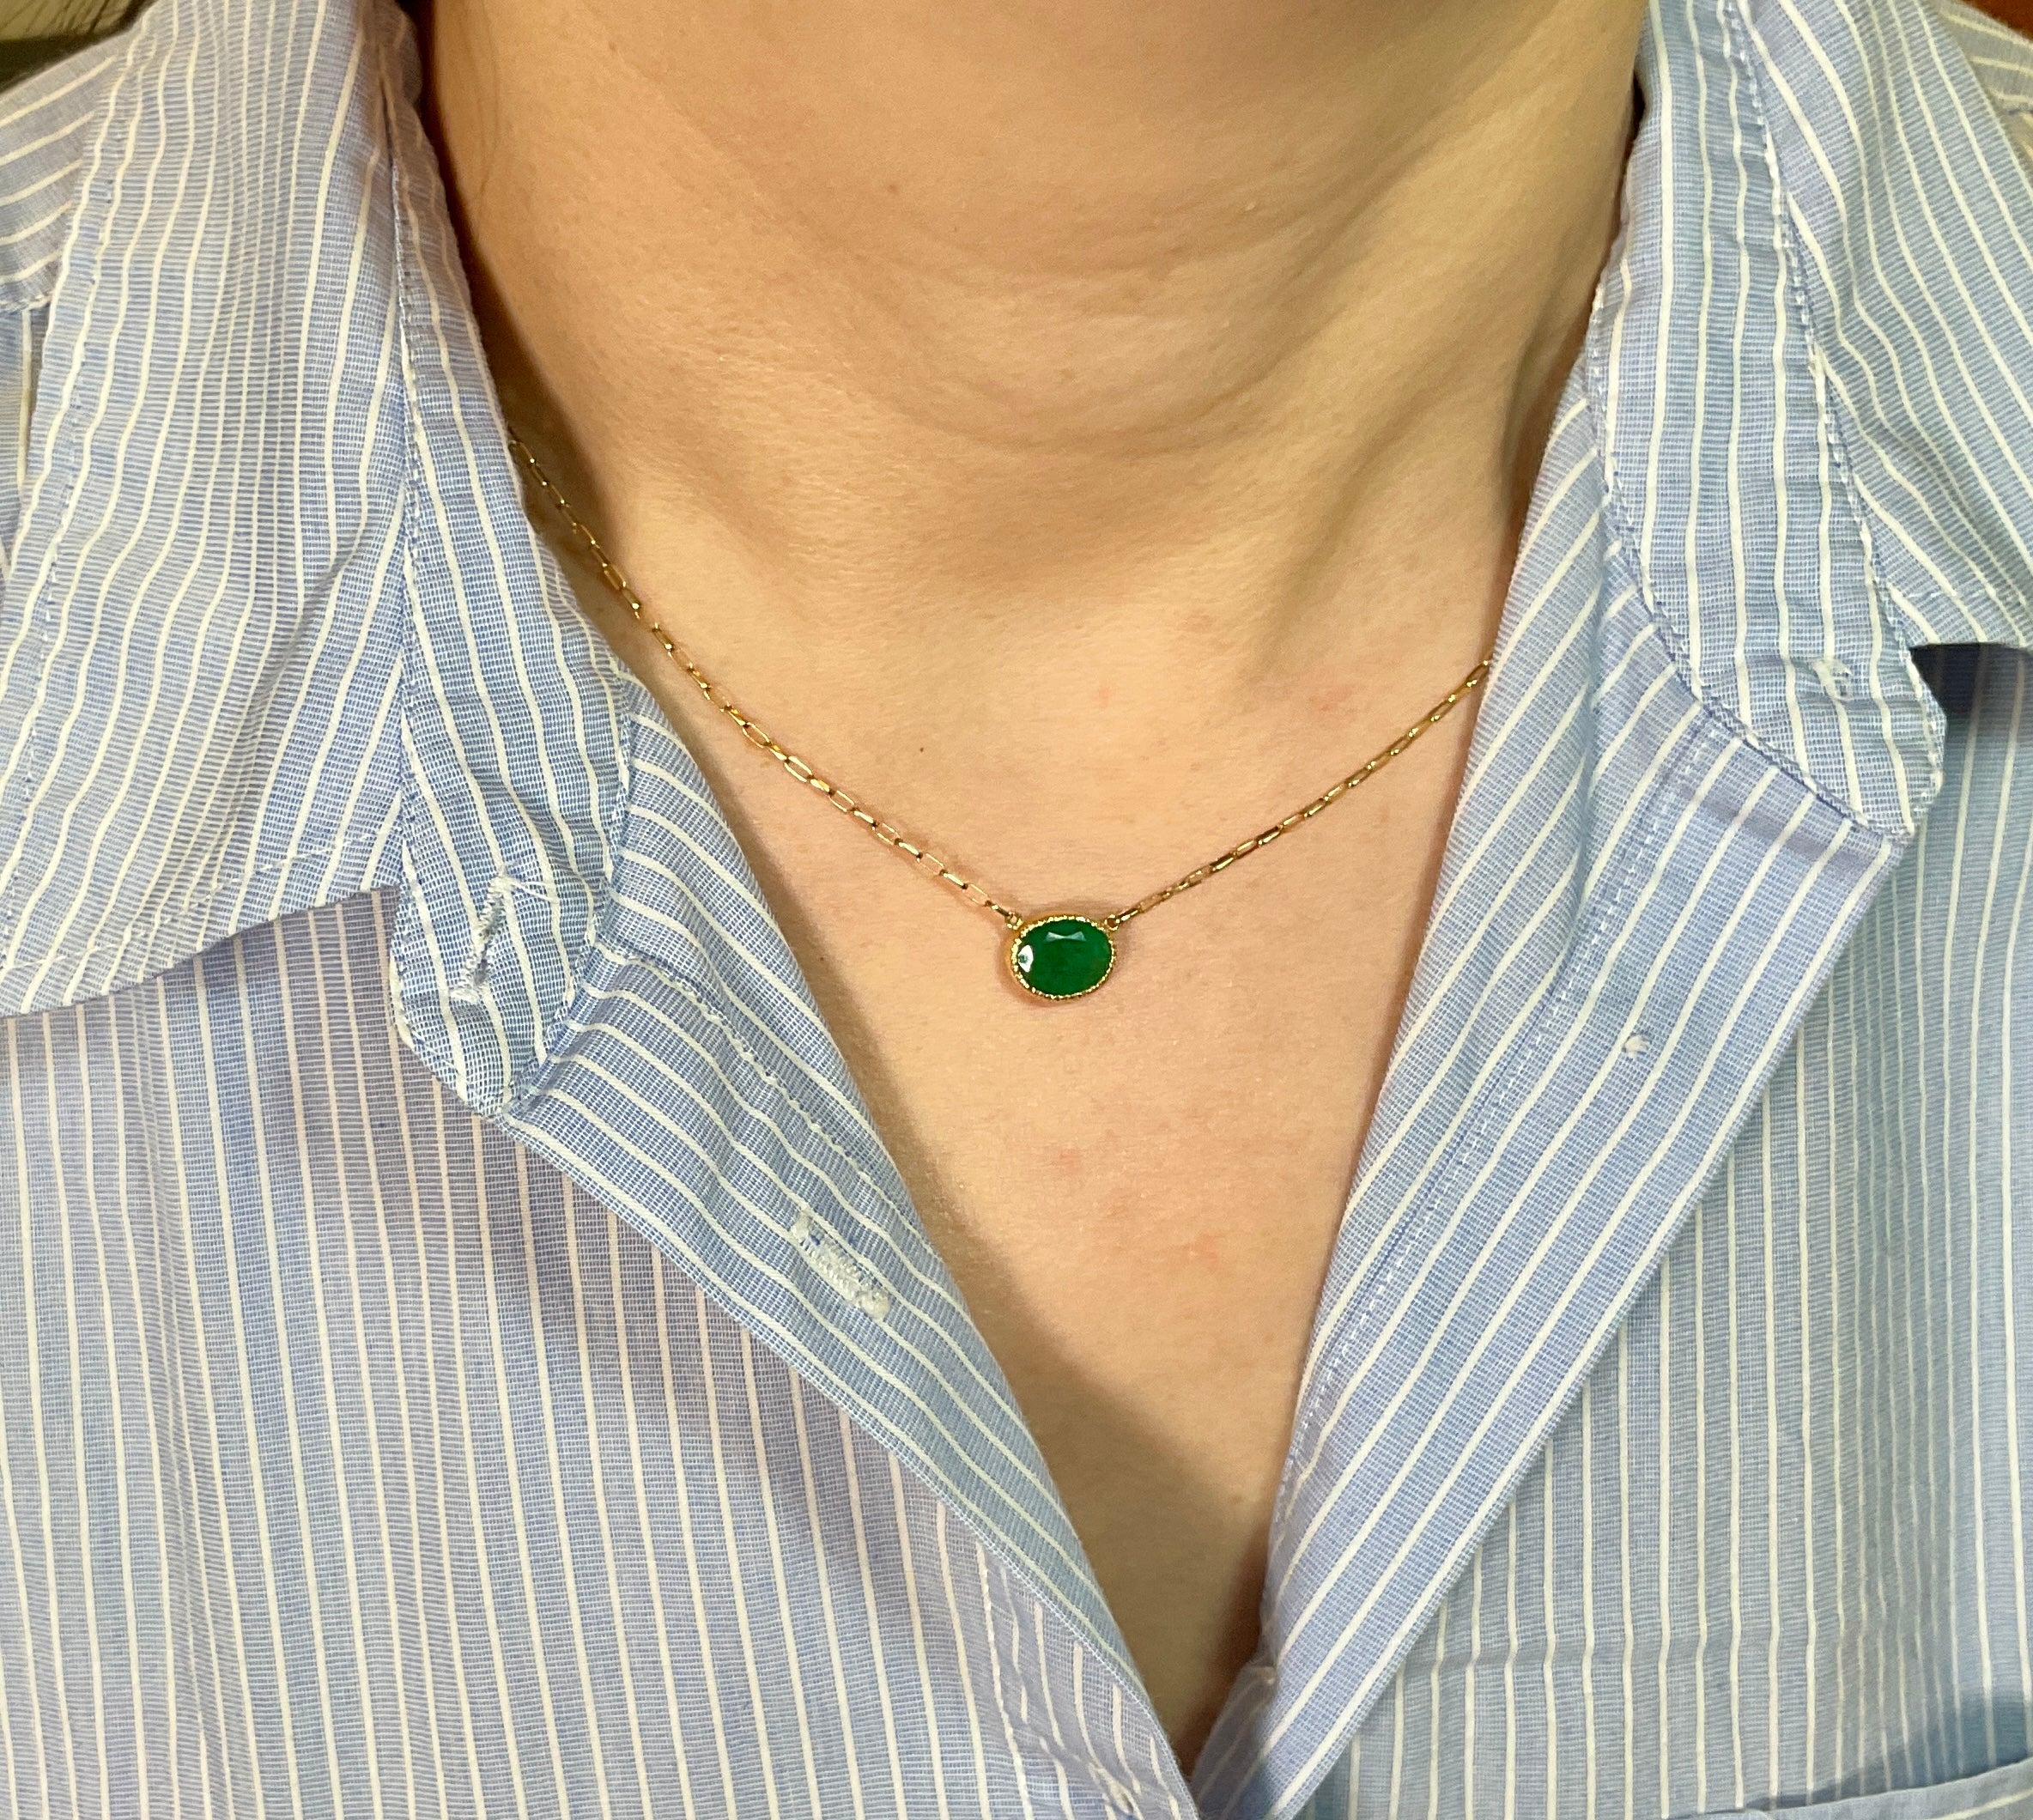 Simply Emerald Necklace in 14k